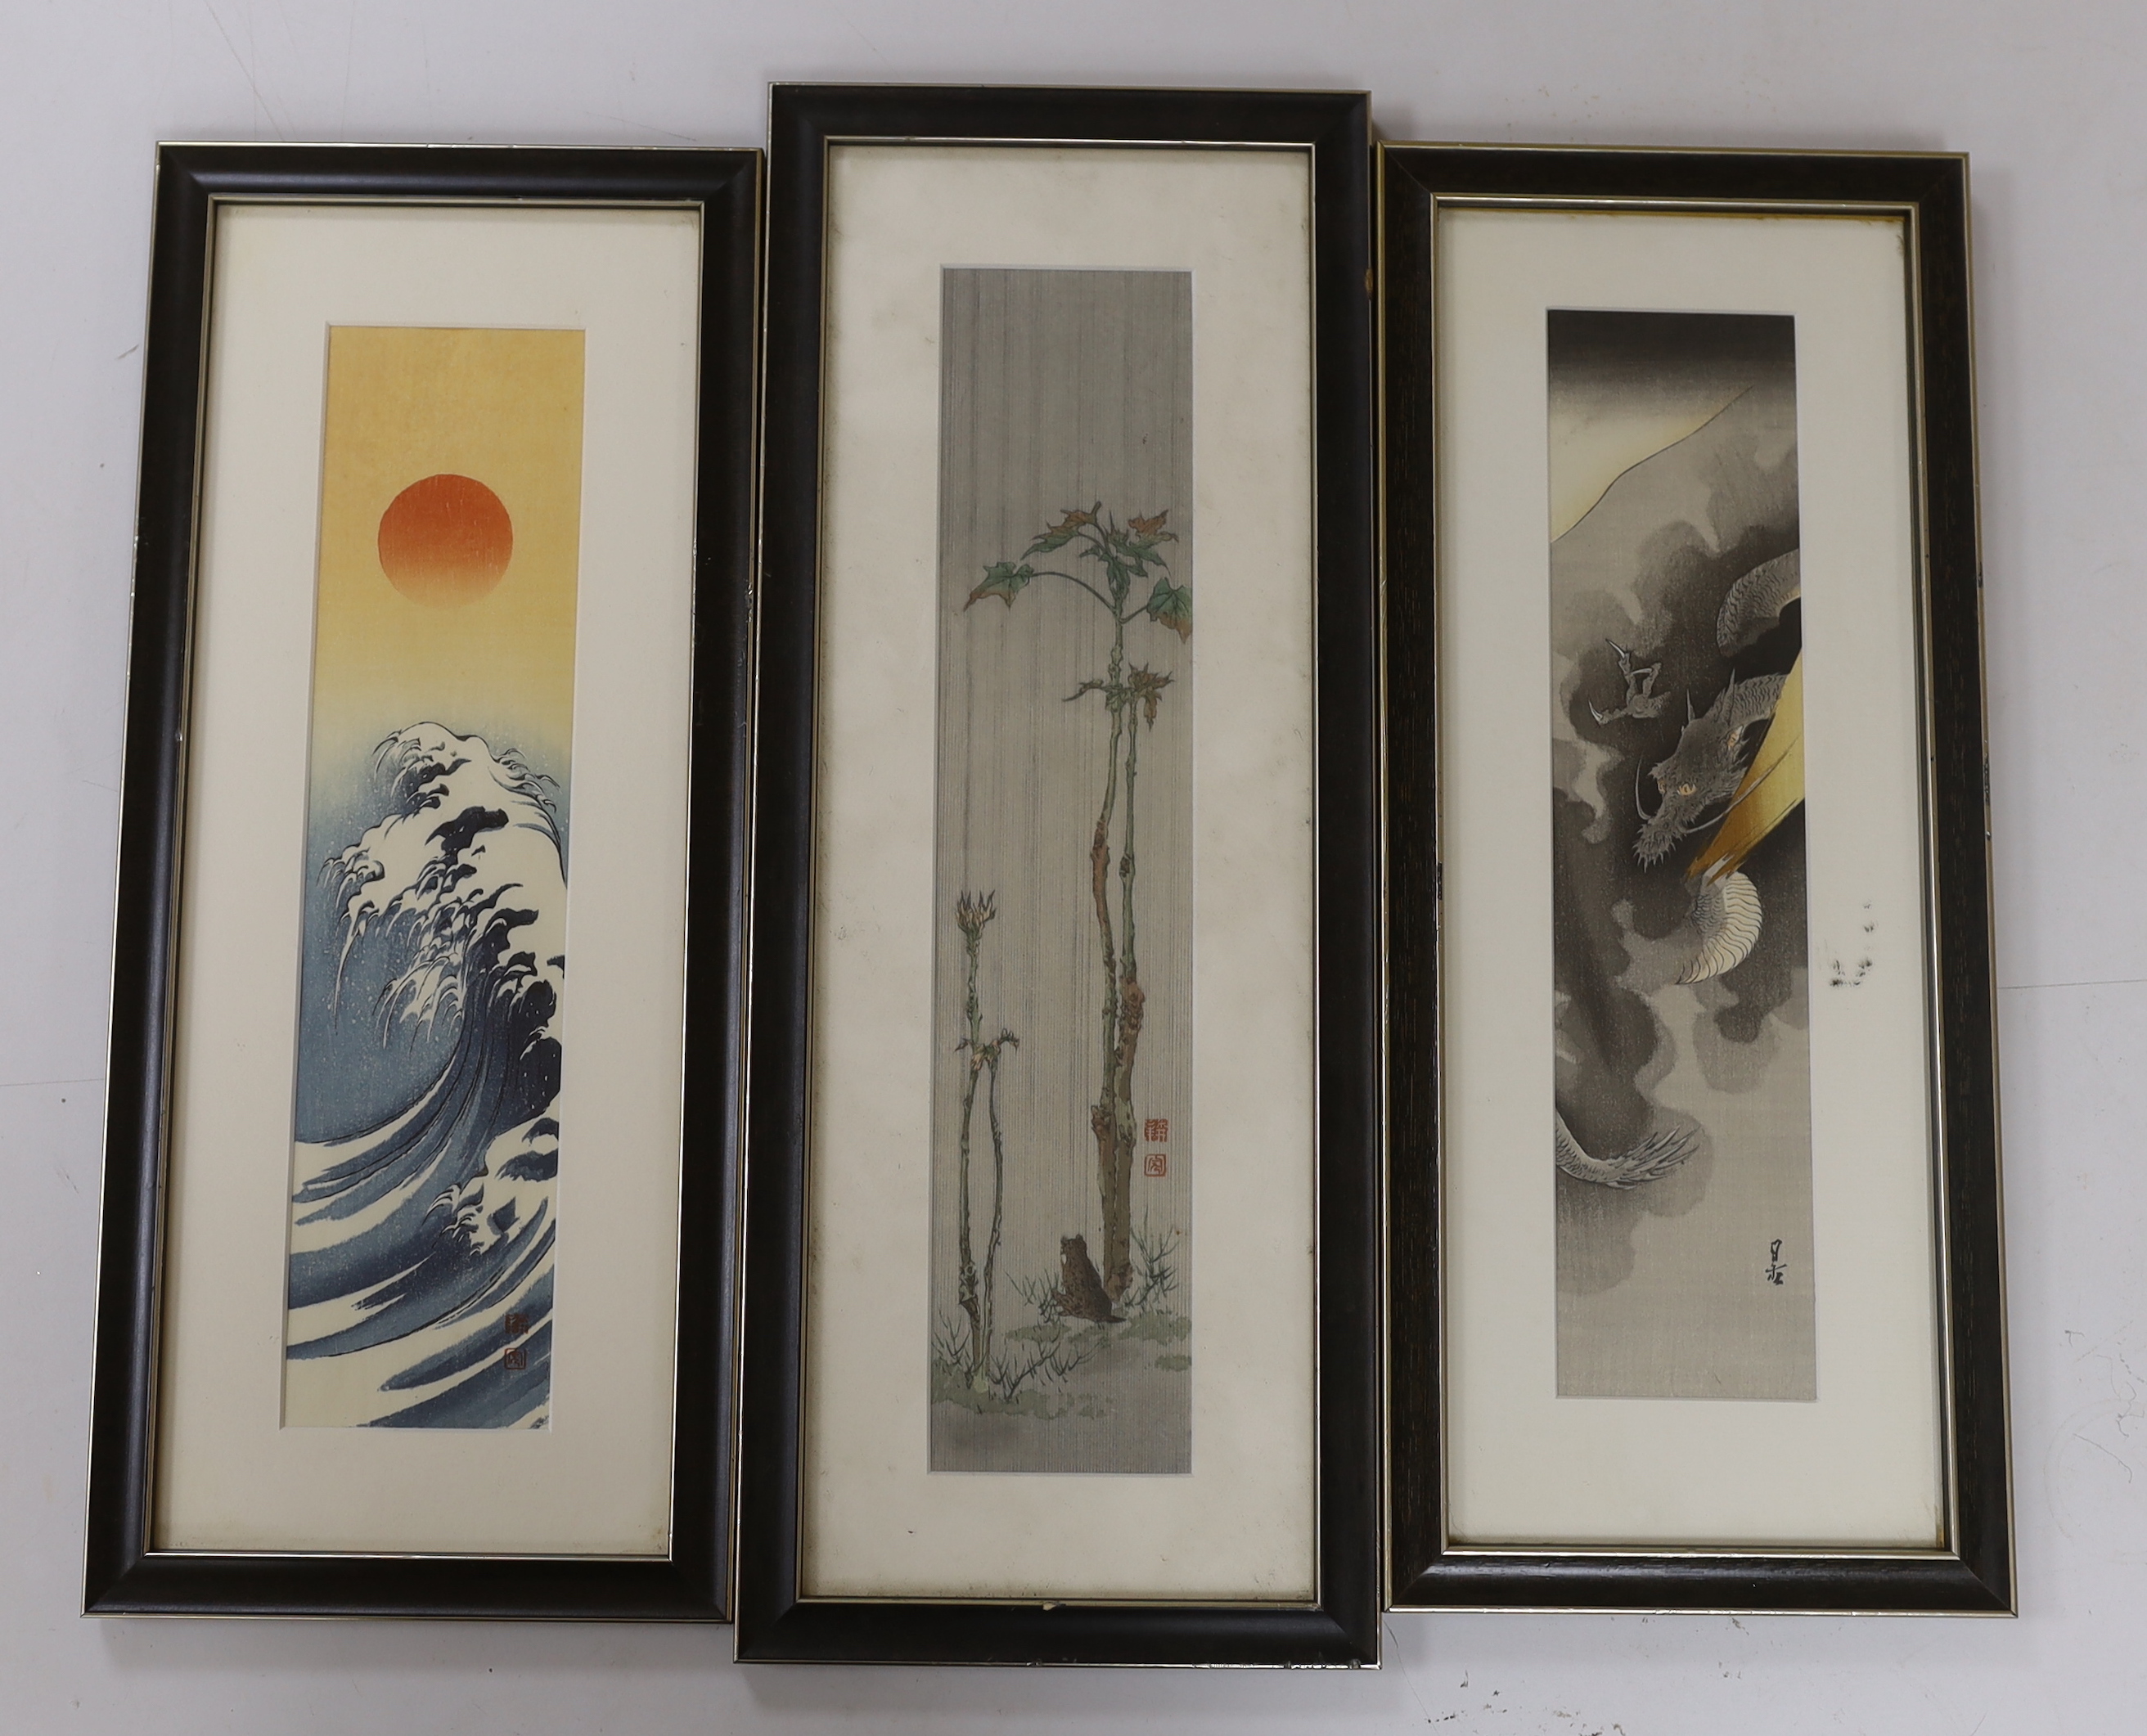 Shoda Koho (1871-1946) two woodblock prints, Great wave at sunrise and rainy day frog and Yoshimito Gesso, woodblock print, Dragon (3), largest 36cm x 8cm